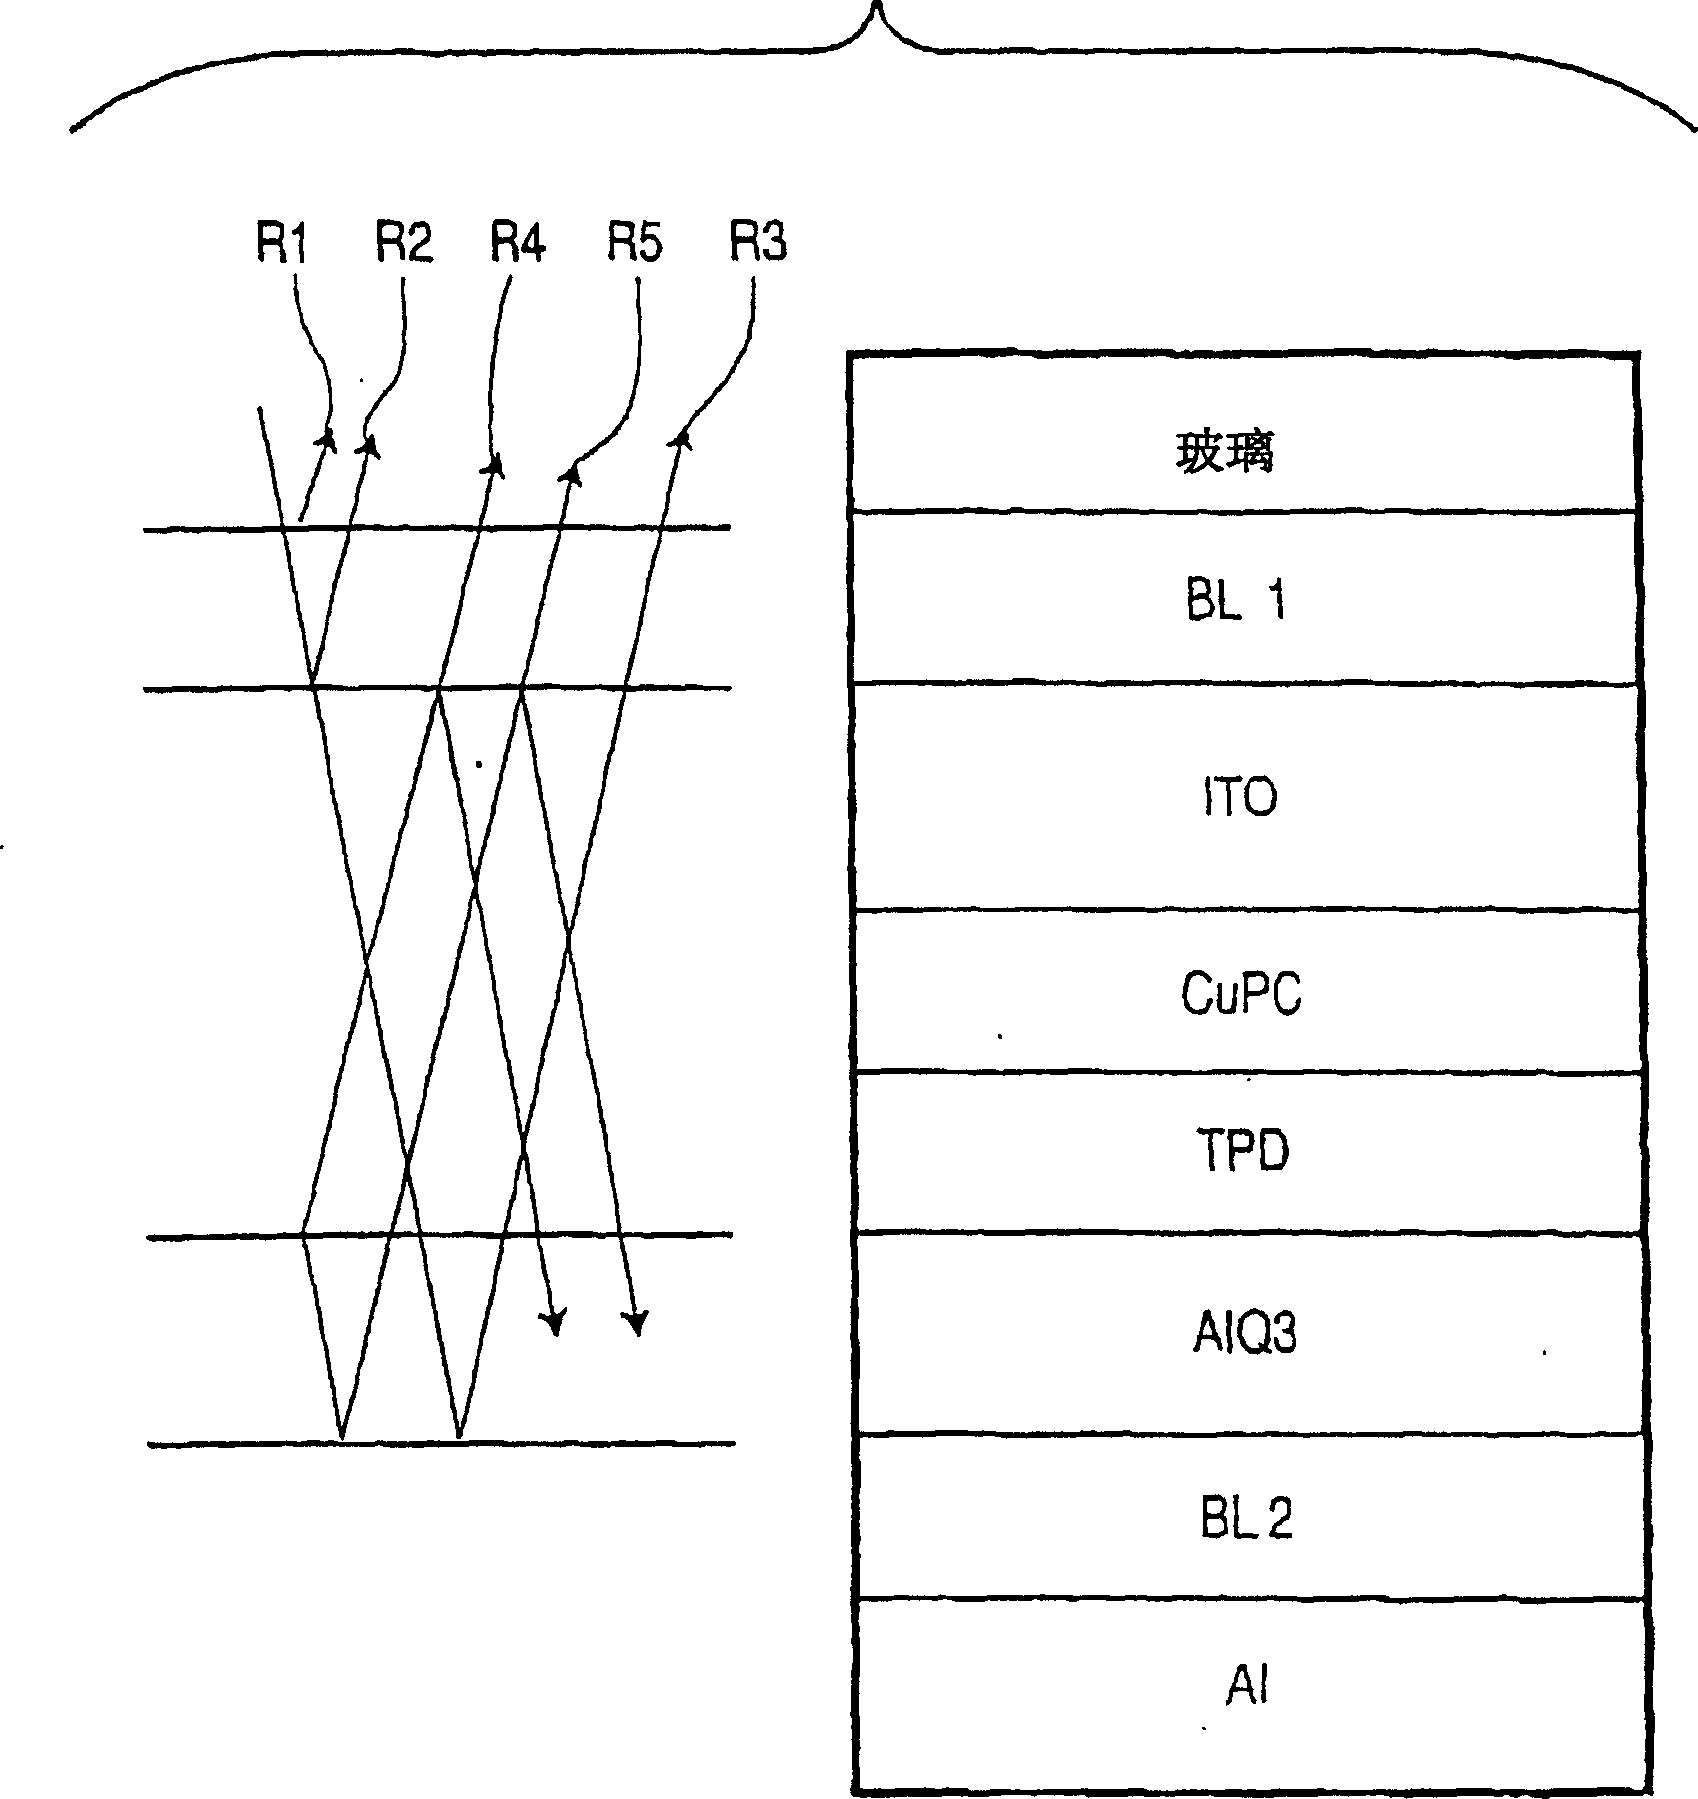 Organic light emitting diode (OLED) with contrast enhancement features